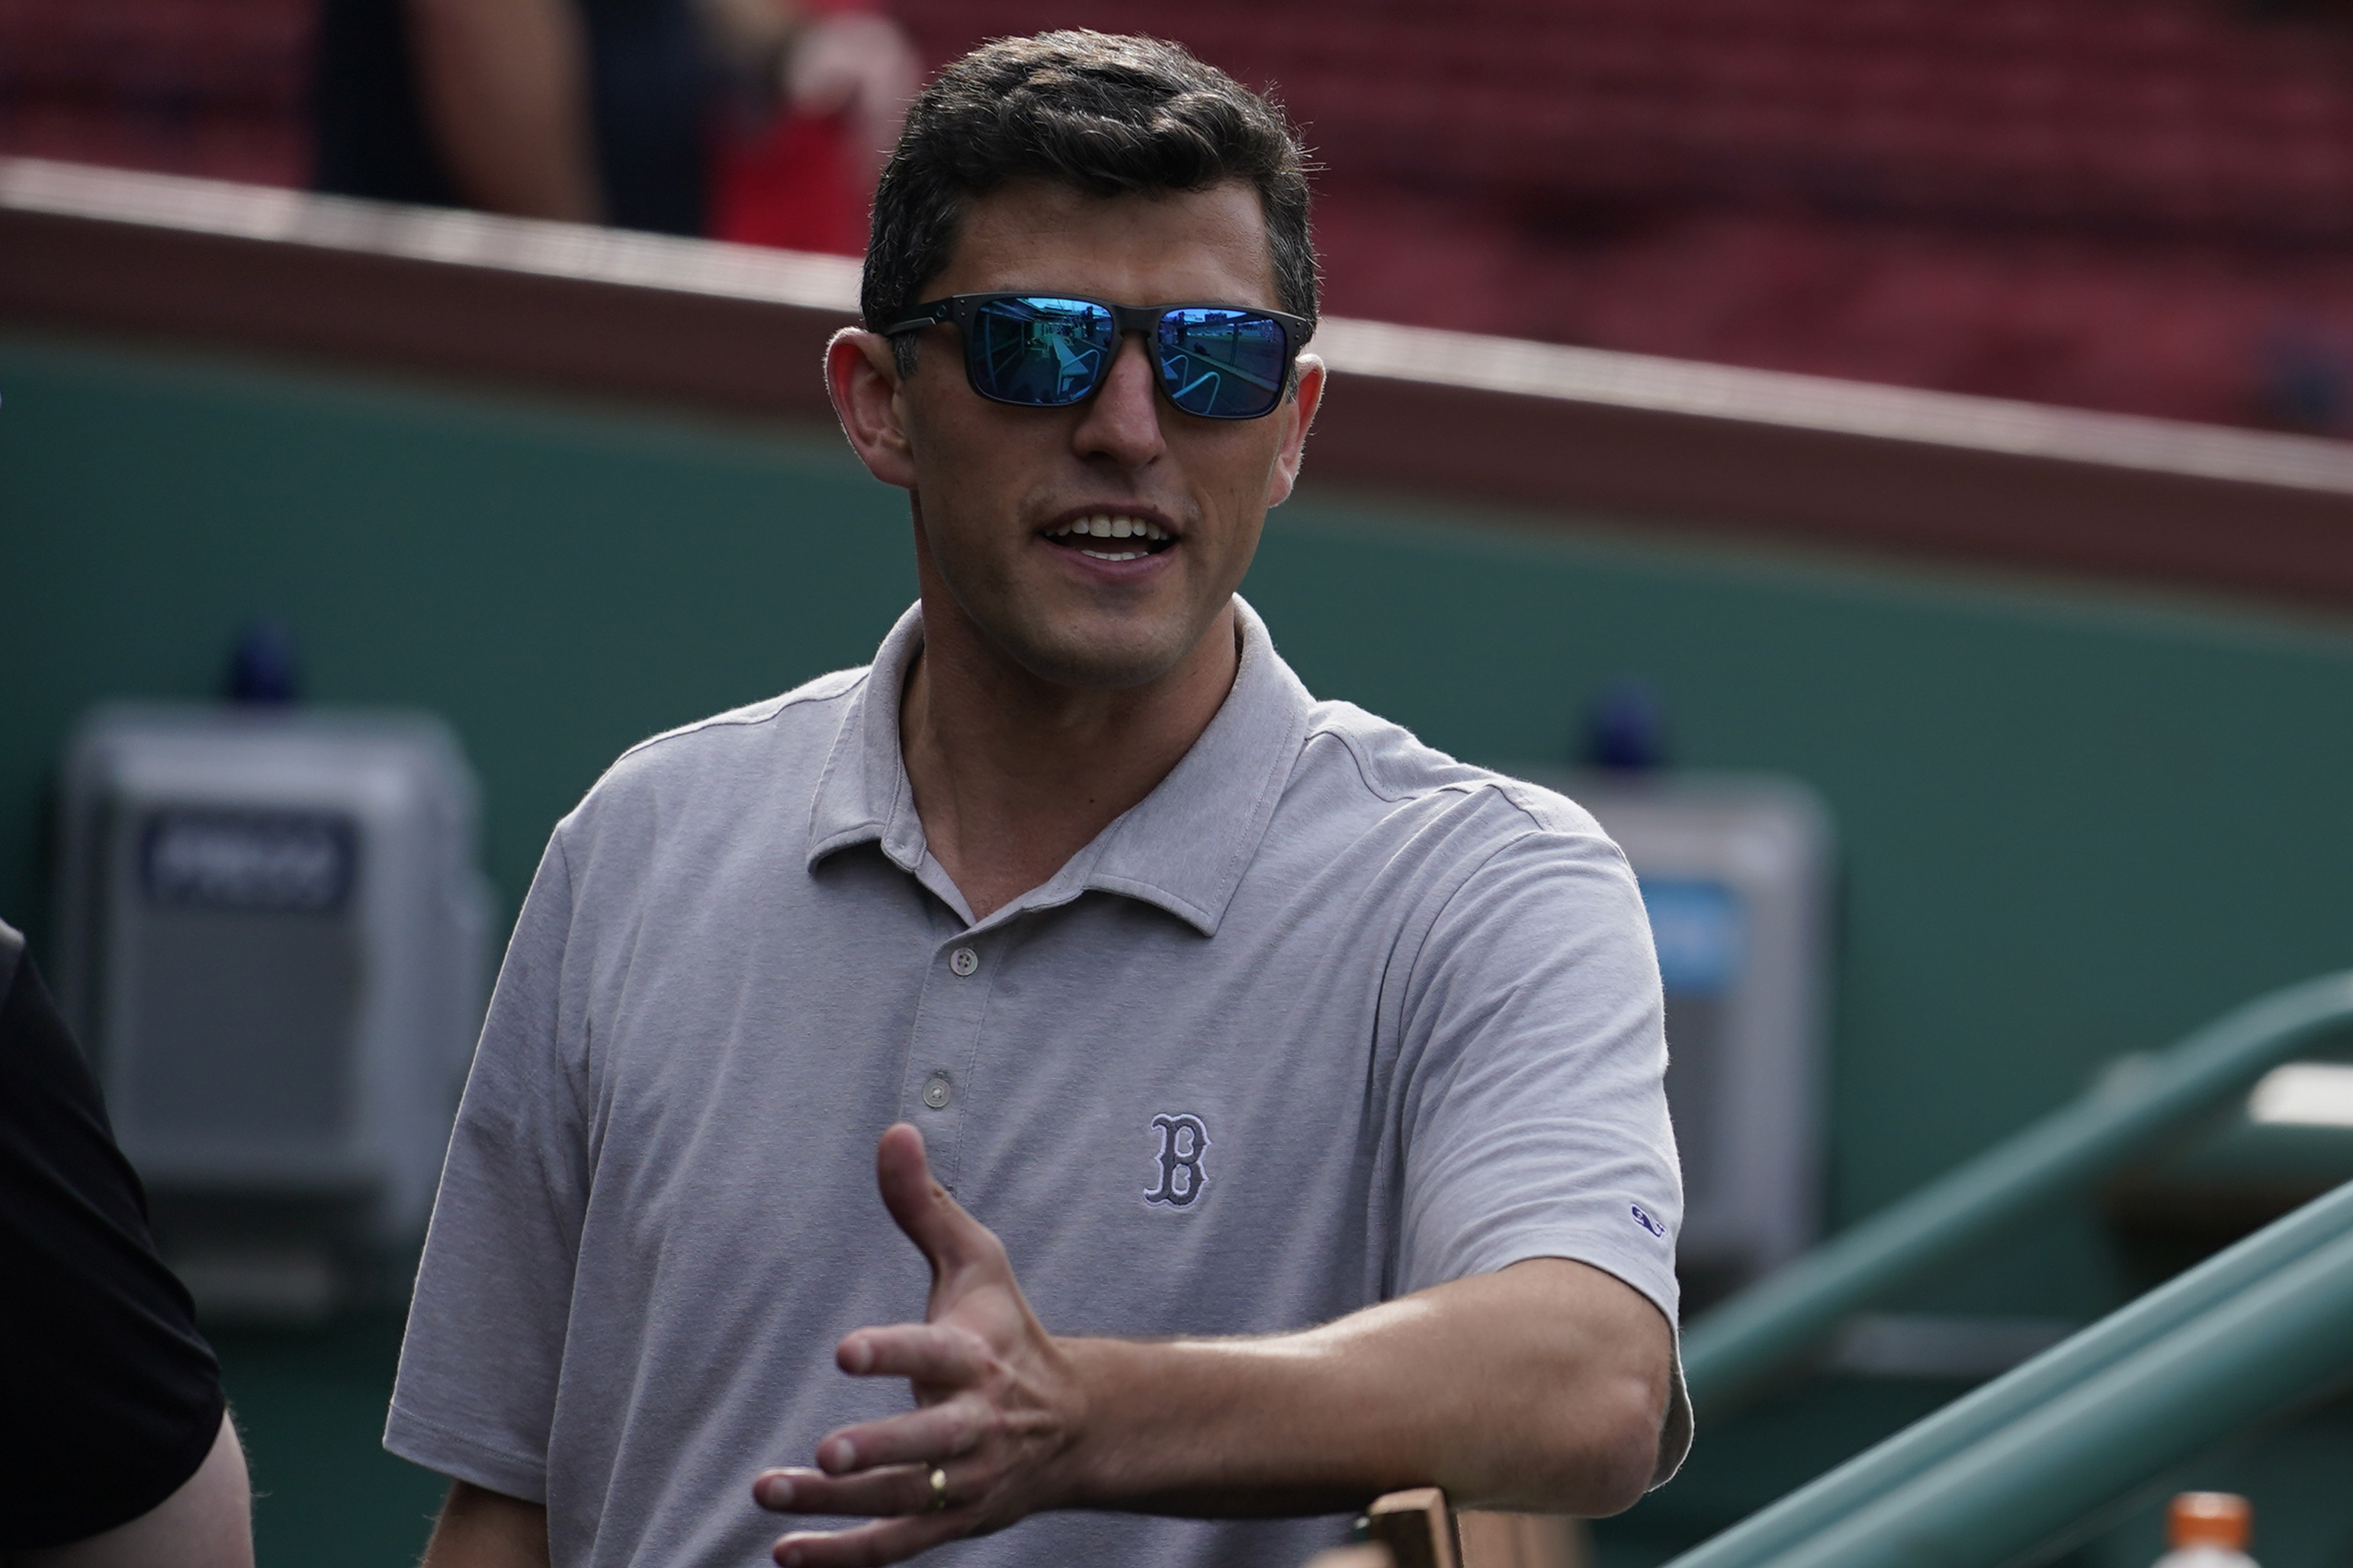 Hiring Chaim Bloom signaled a change in the Boston Red Sox's